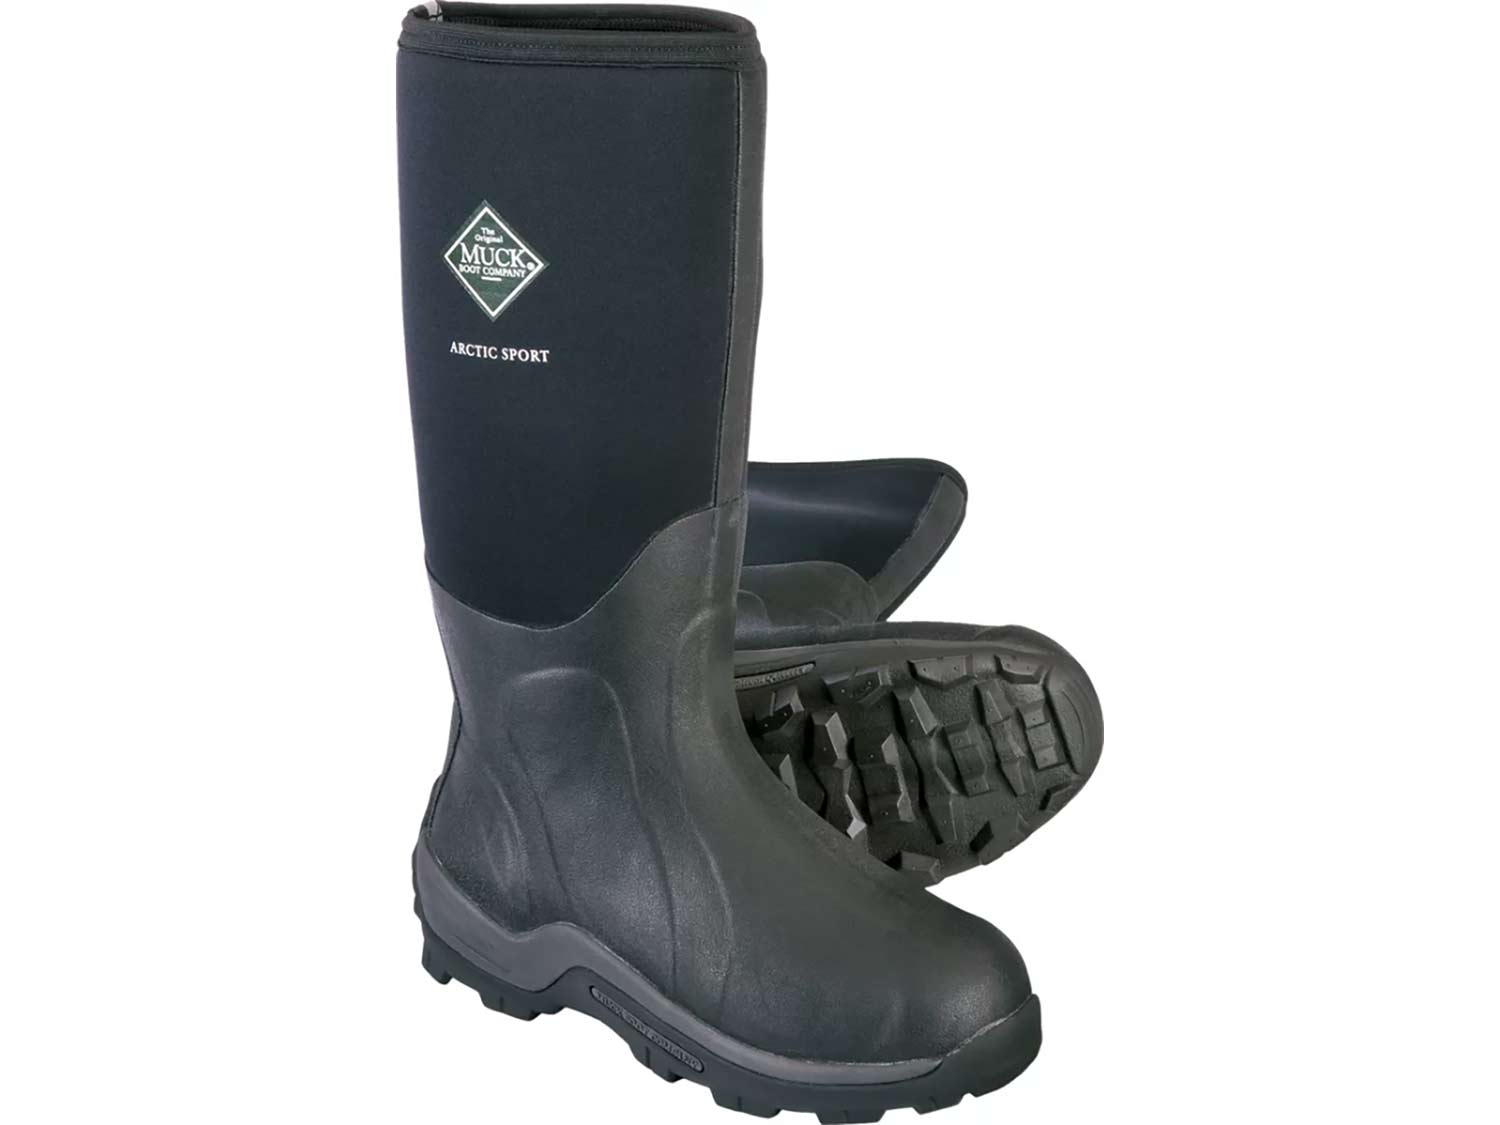 The Original Muck Boot Company Arctic Sport Extreme-Conditions Boots for Men